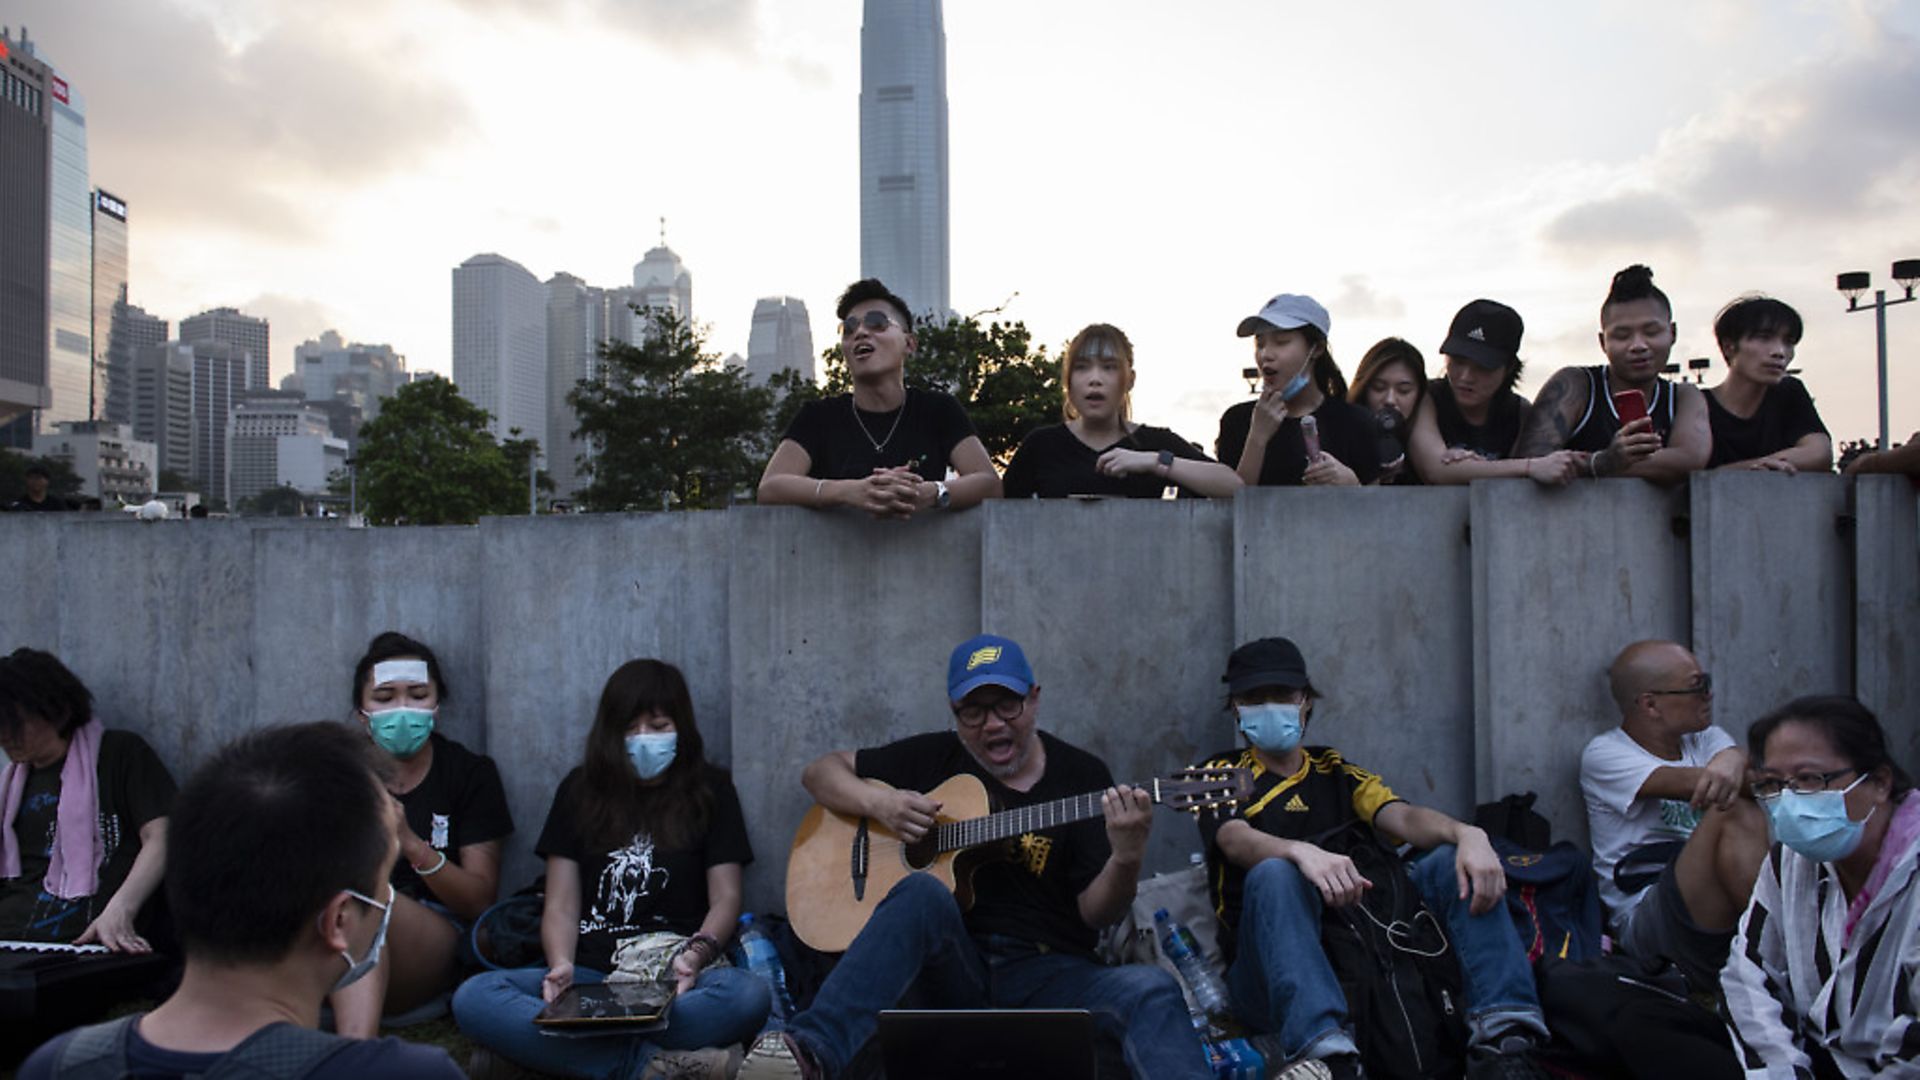 Protesters gather near Hong Kong's Legislative Council Complex singing encouraging songs to support the movement and mass rally.  Photo: Miguel Candela/SOPA Images/LightRocket via Getty Images - Credit: LightRocket via Getty Images